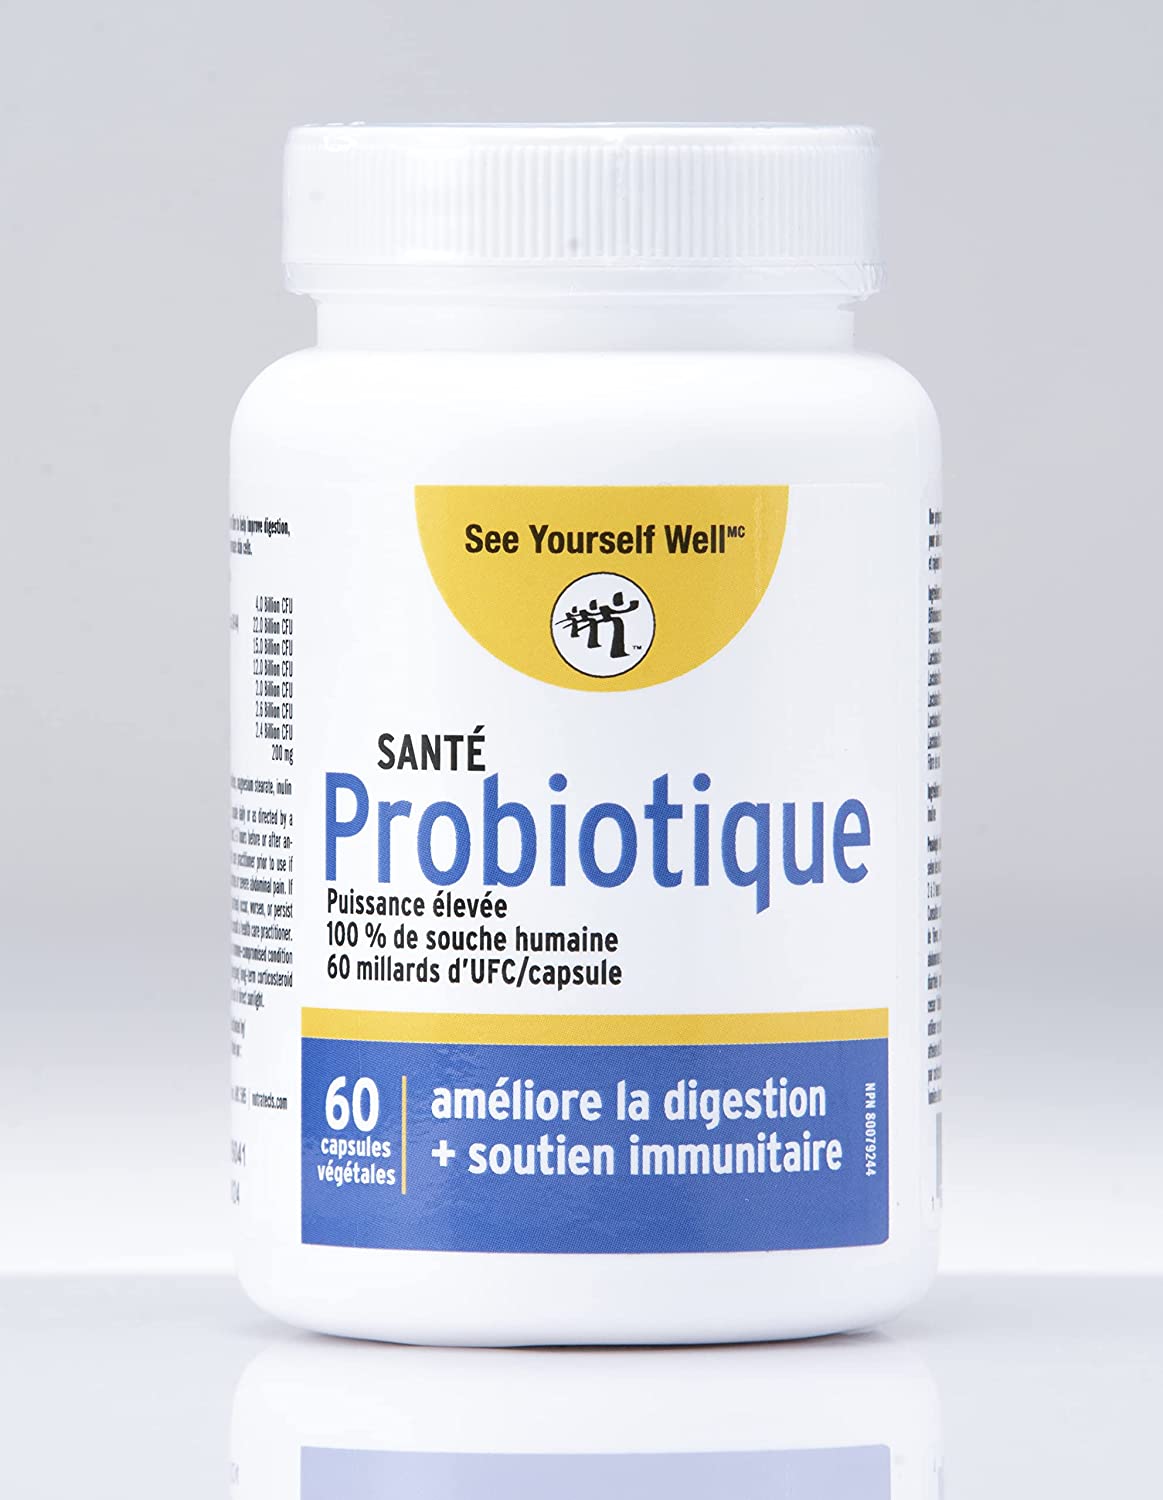 See Yourself Well Probiotic Health 60 capsules